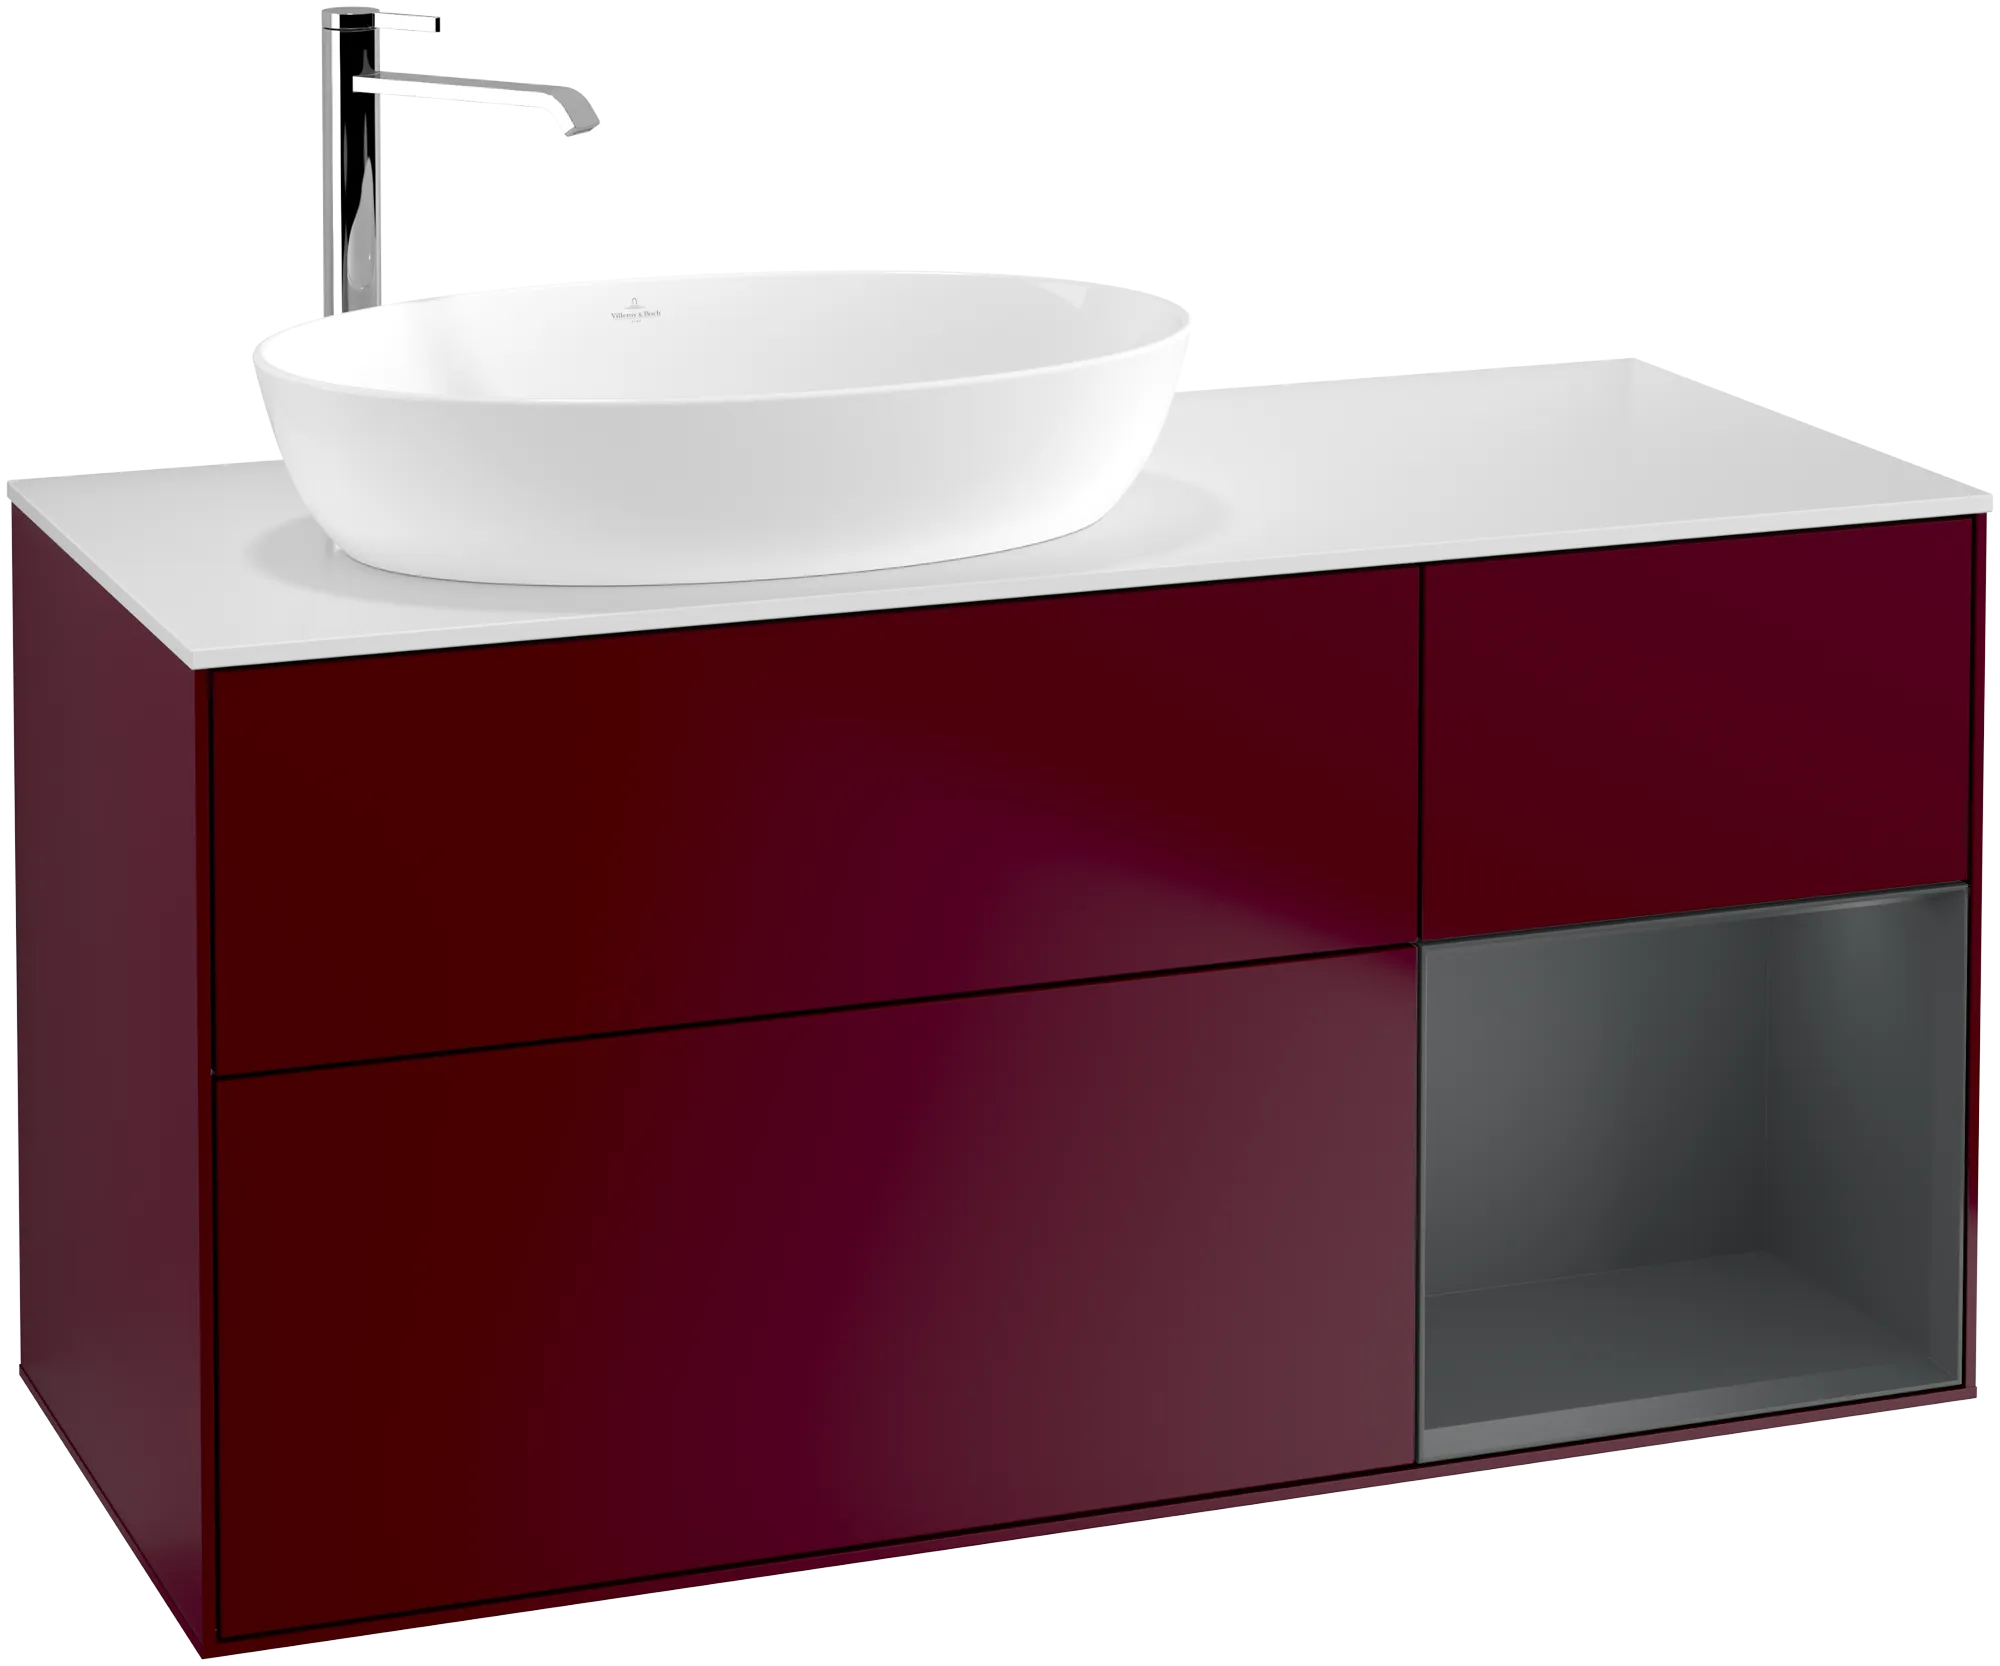 Picture of VILLEROY BOCH Finion Vanity unit, with lighting, 3 pull-out compartments, 1200 x 603 x 501 mm, Peony Matt Lacquer / Midnight Blue Matt Lacquer / Glass White Matt #G931HGHB